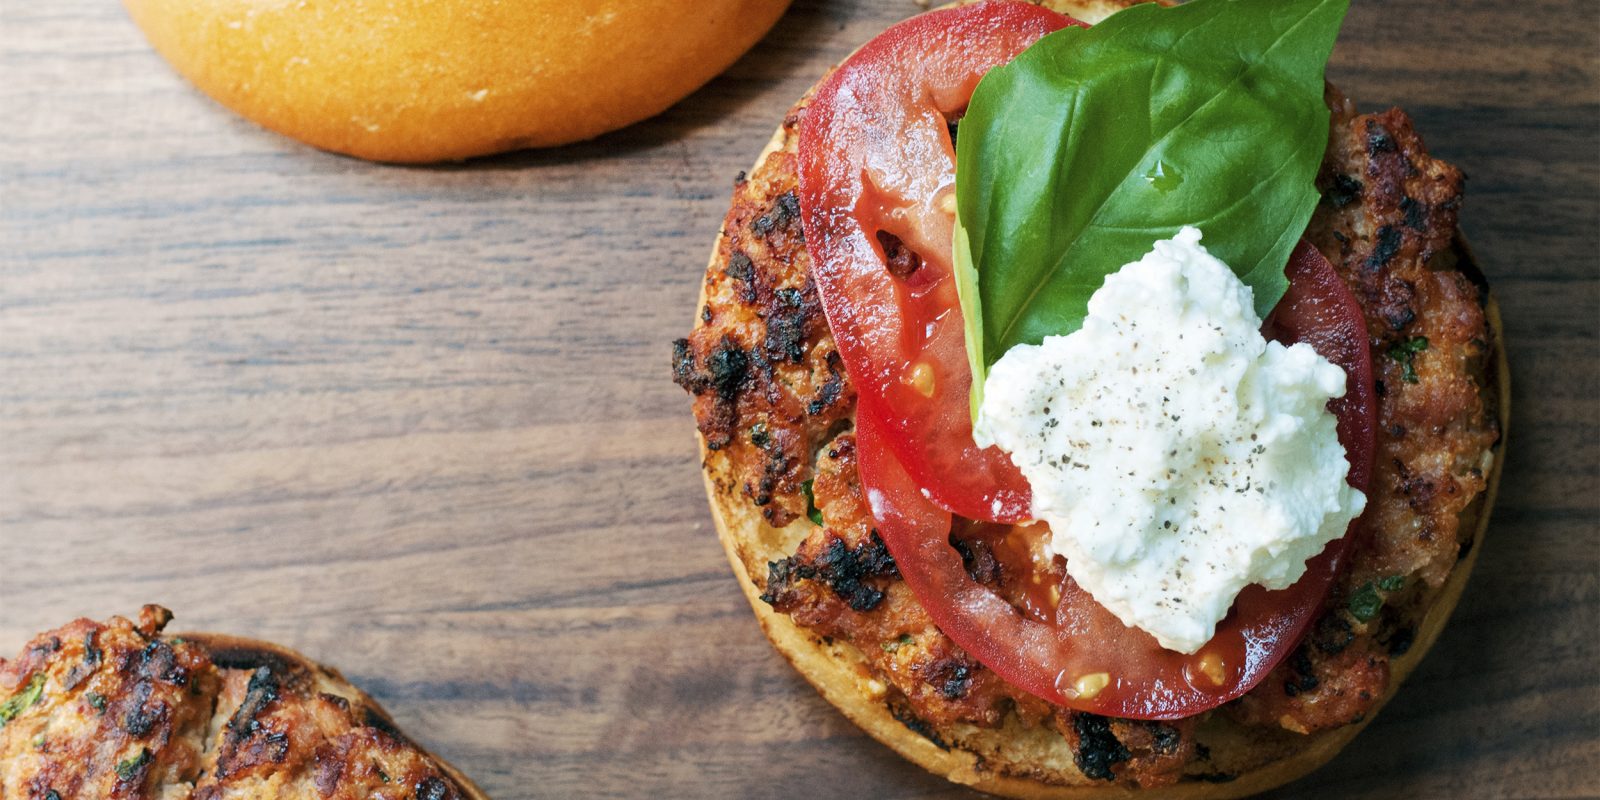 Andrew Zimmern S Ultimate Turkey Burger With Tomato Ricotta And Basil Andrew Zimmern